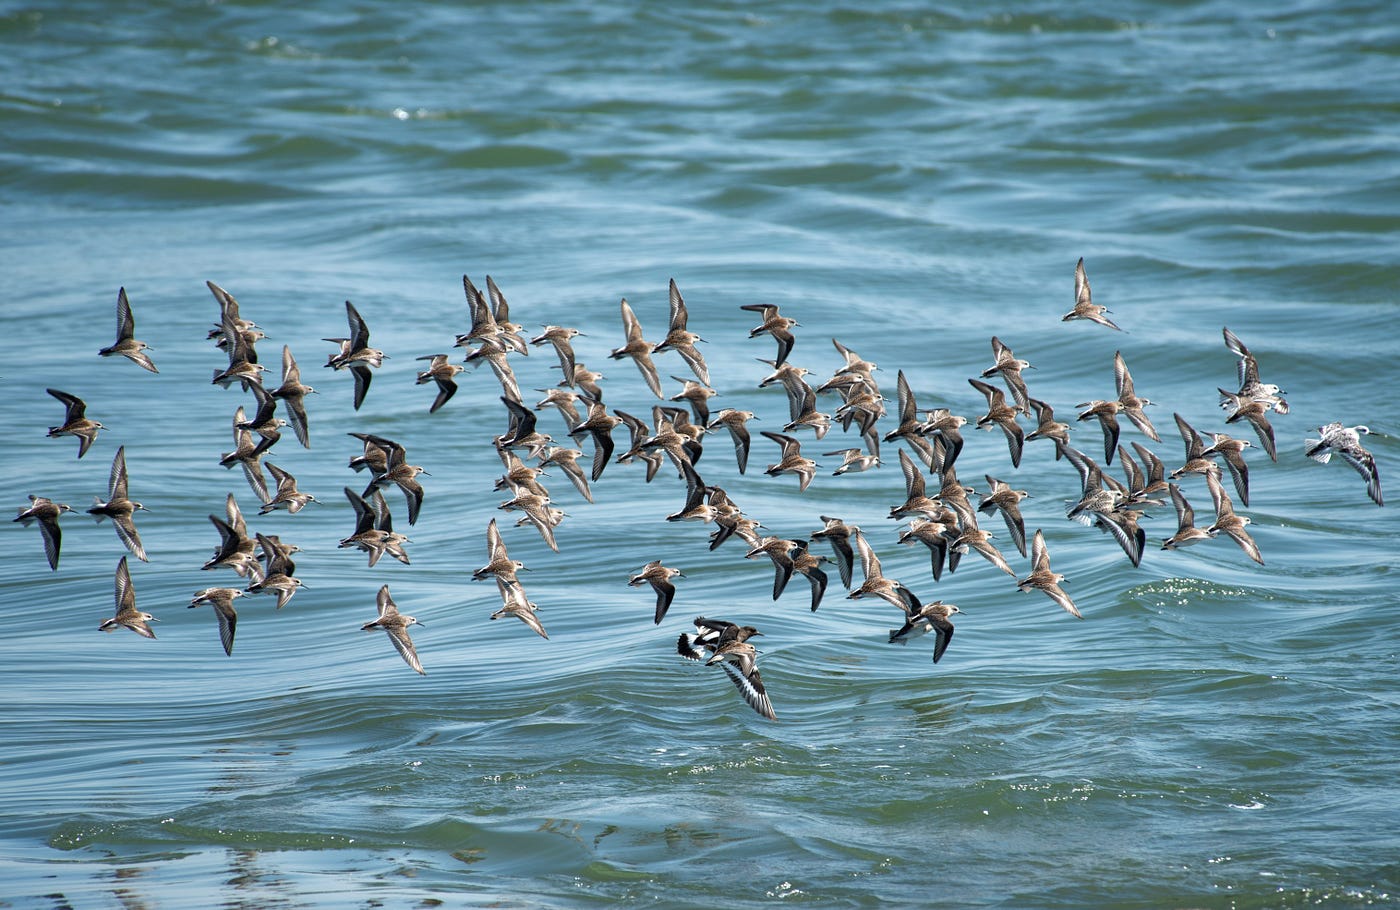 Photo of birds flying over body of water as they migrate for Justiss Goode Medium story about weekly story migration.